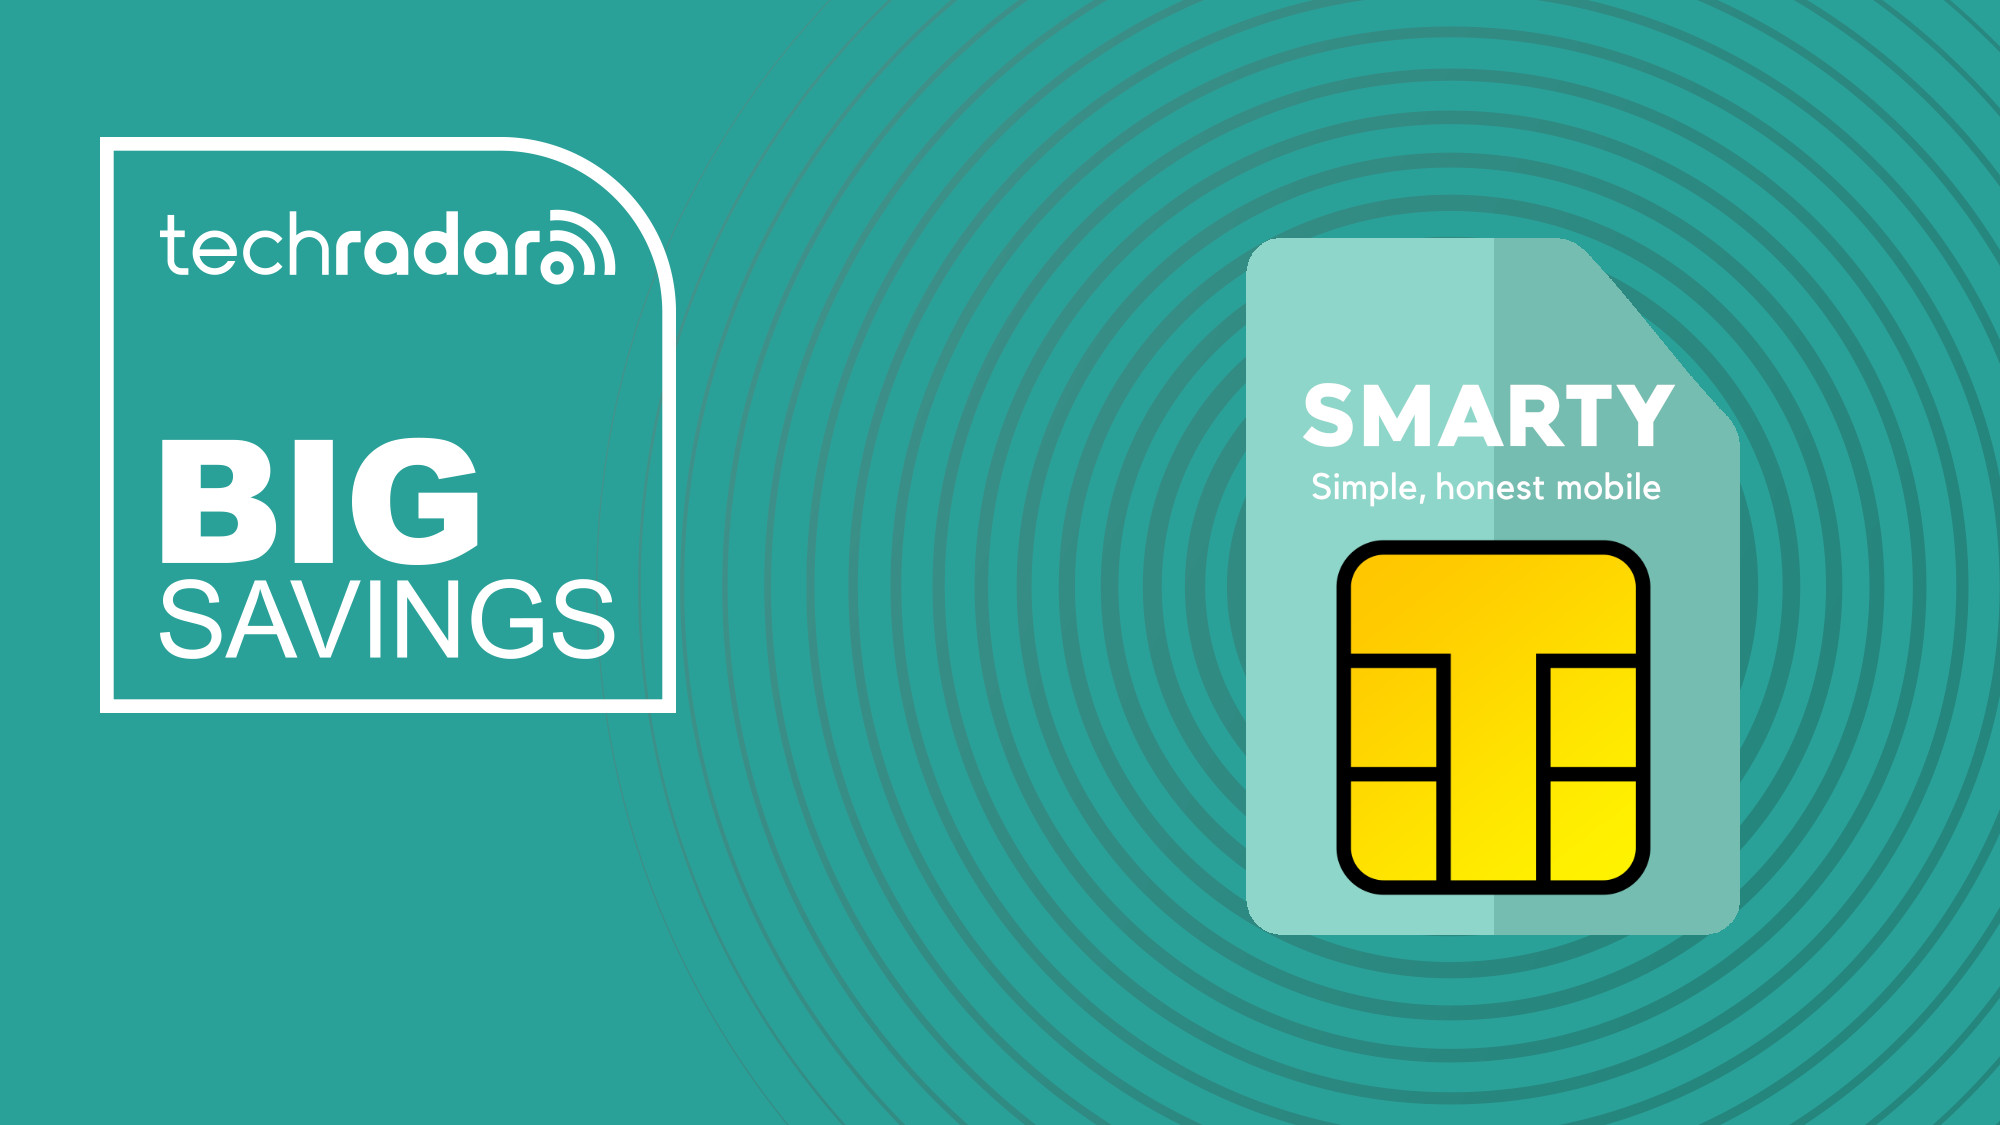 Smarty's new SIM only deals start at just £6 per month this week